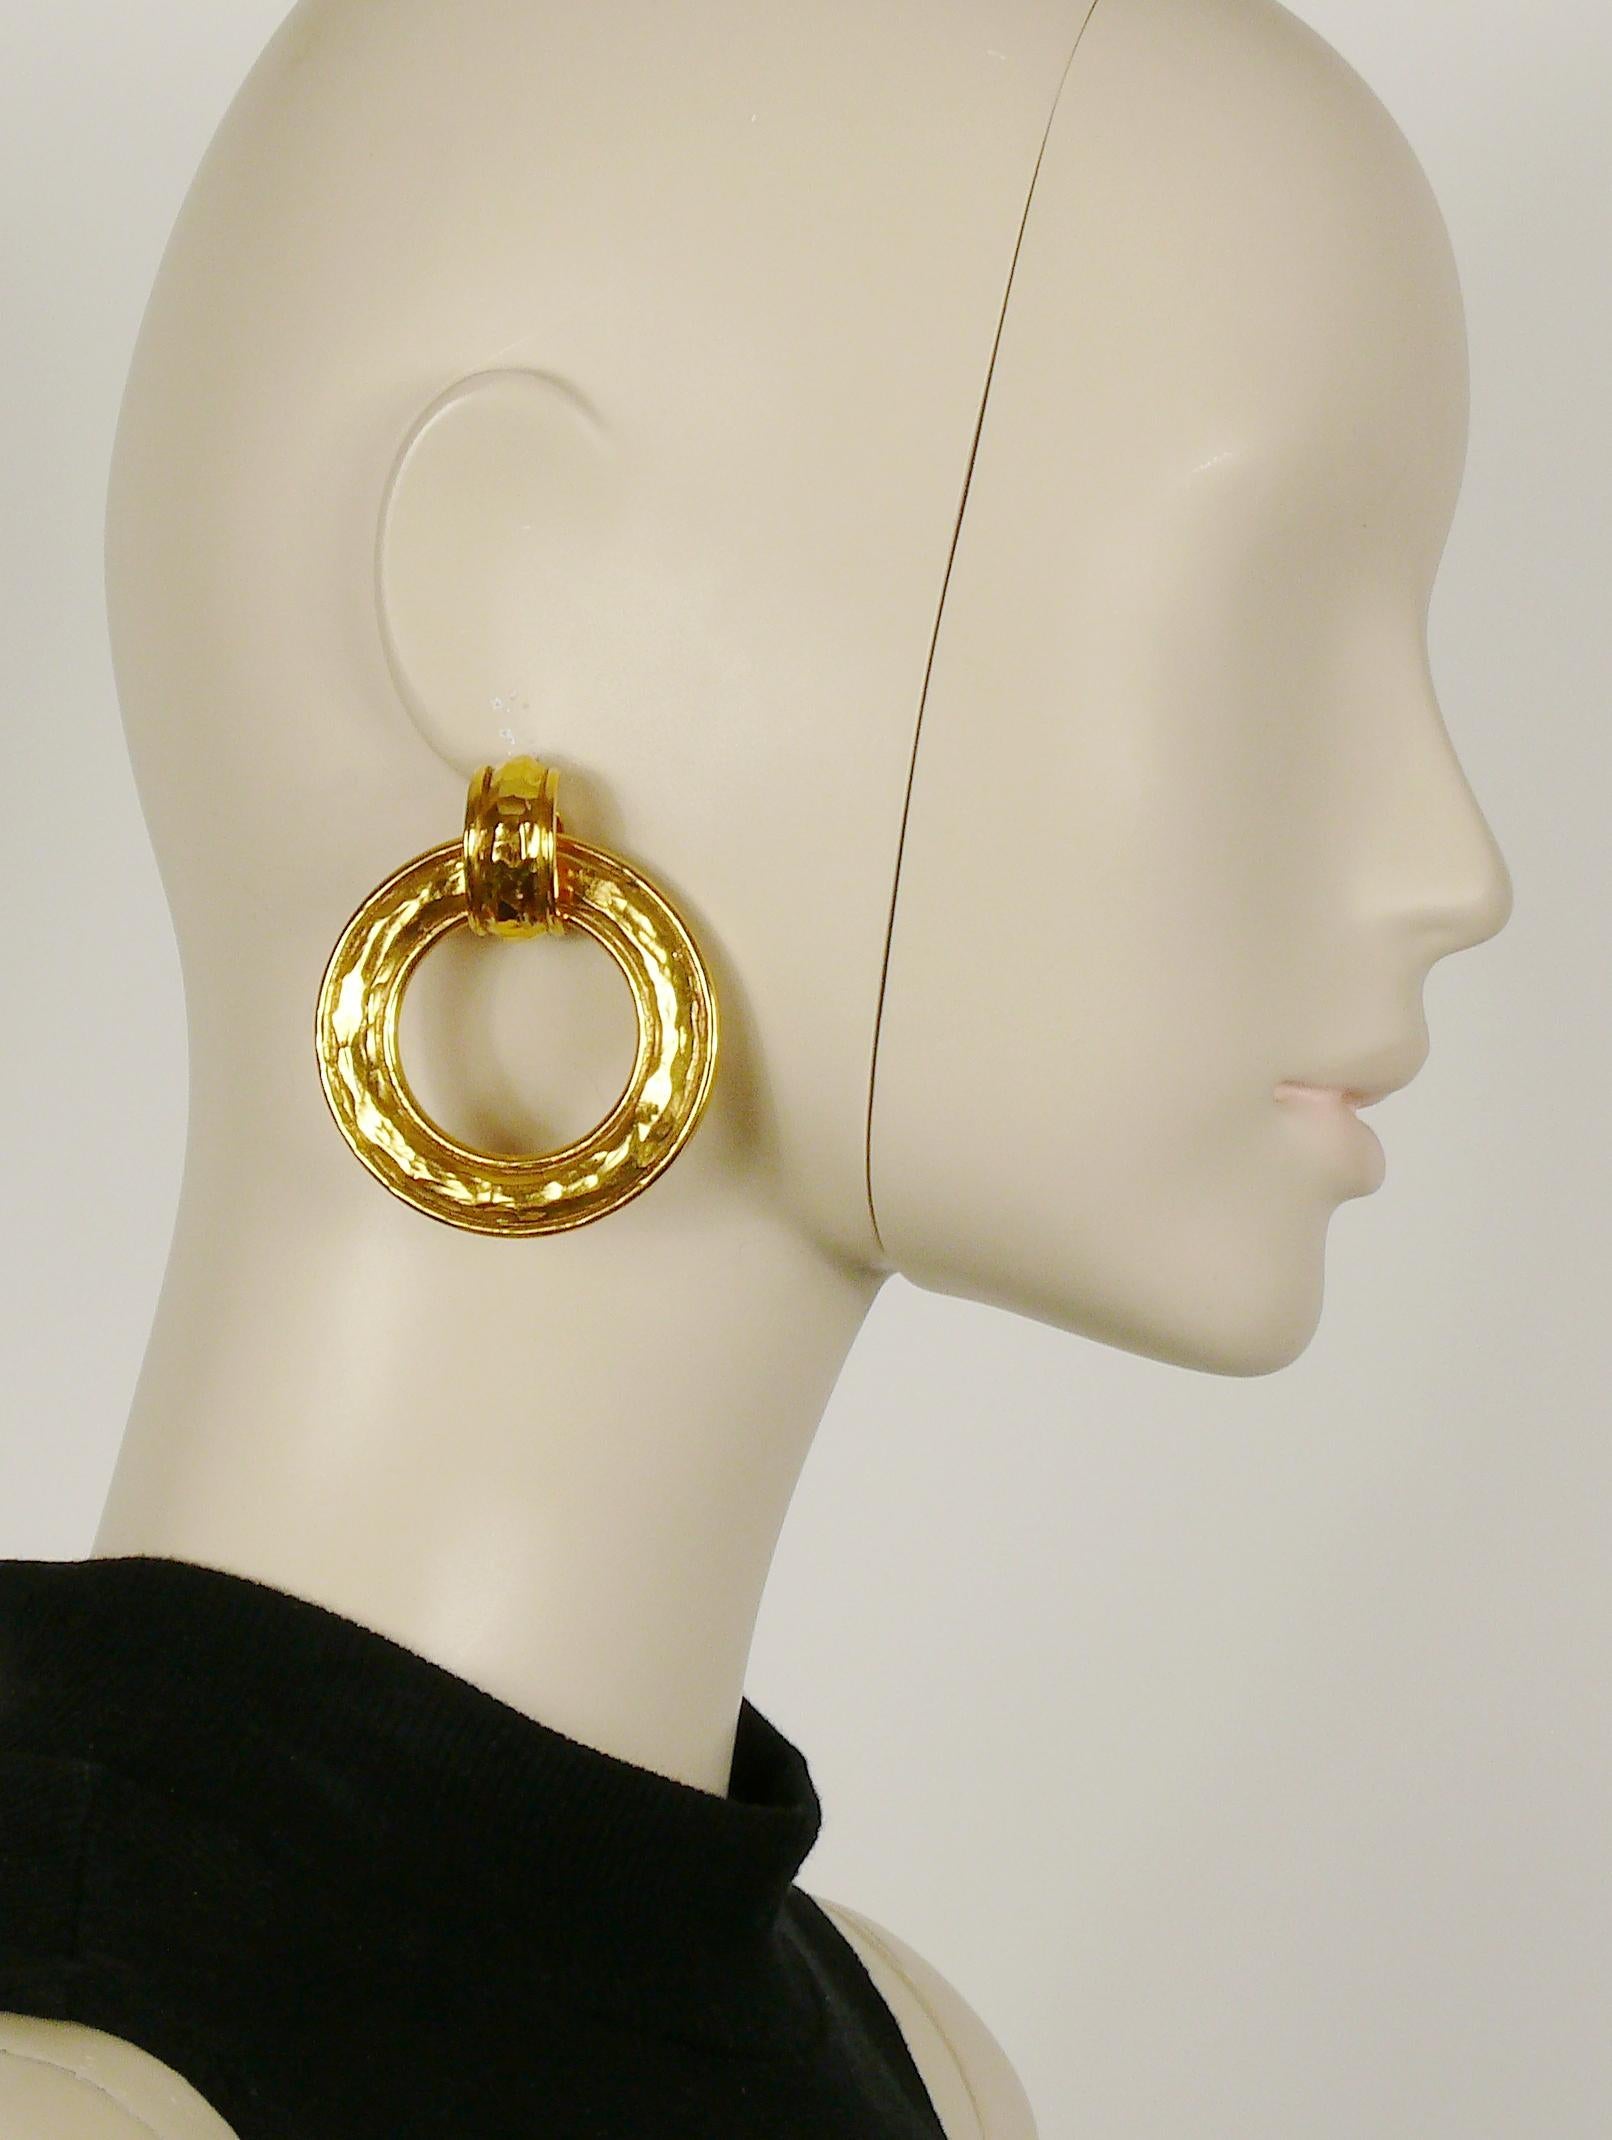 CHANEL vintage detachable hammered gold toned hoop earrings (clip-on).

Could be worn two ways.

Embossed CHANEL Made in France.

Indicative measurements : height approx. 5.5 cm (2.17 inches) / diameter approx. 5.2 cm (2.05 inches).

NOTES
- This is